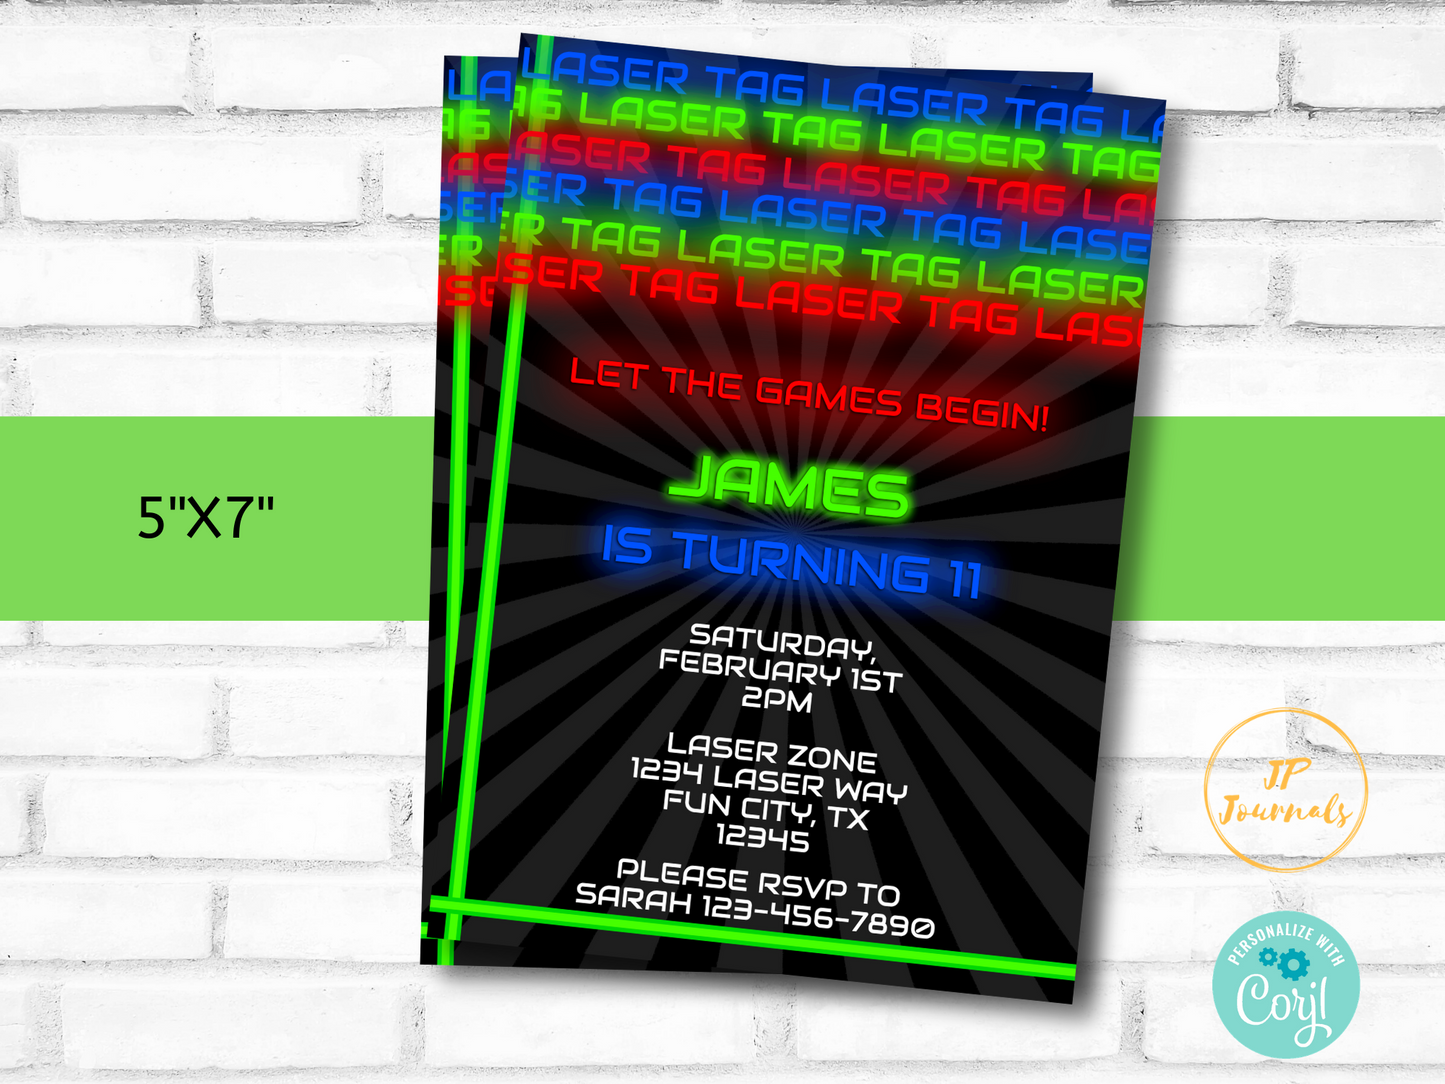 Laser Tag Birthday Party Invitation Template - DIY Edit & Print - Printable Invitation - Laser Tag Birthday Party for Boys